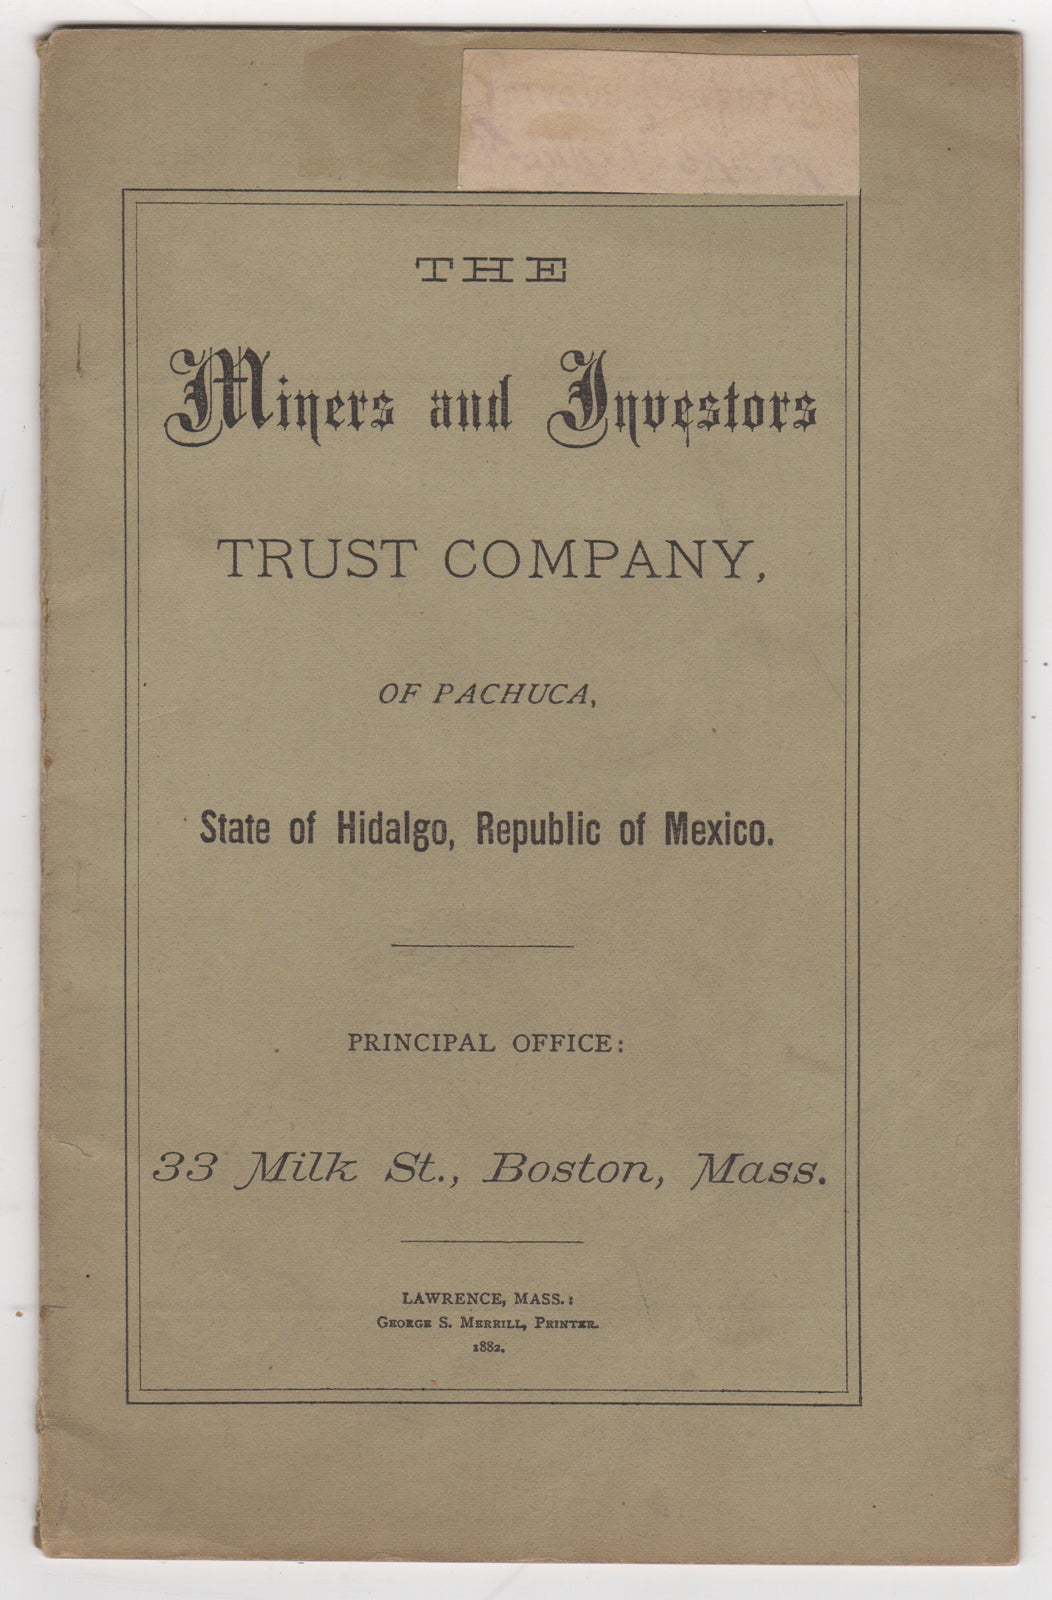 Miners and Investors Trust Company - The Miners and Investors Trust Company, of Pachuca, State of Hidalgo, Republic of Mexico